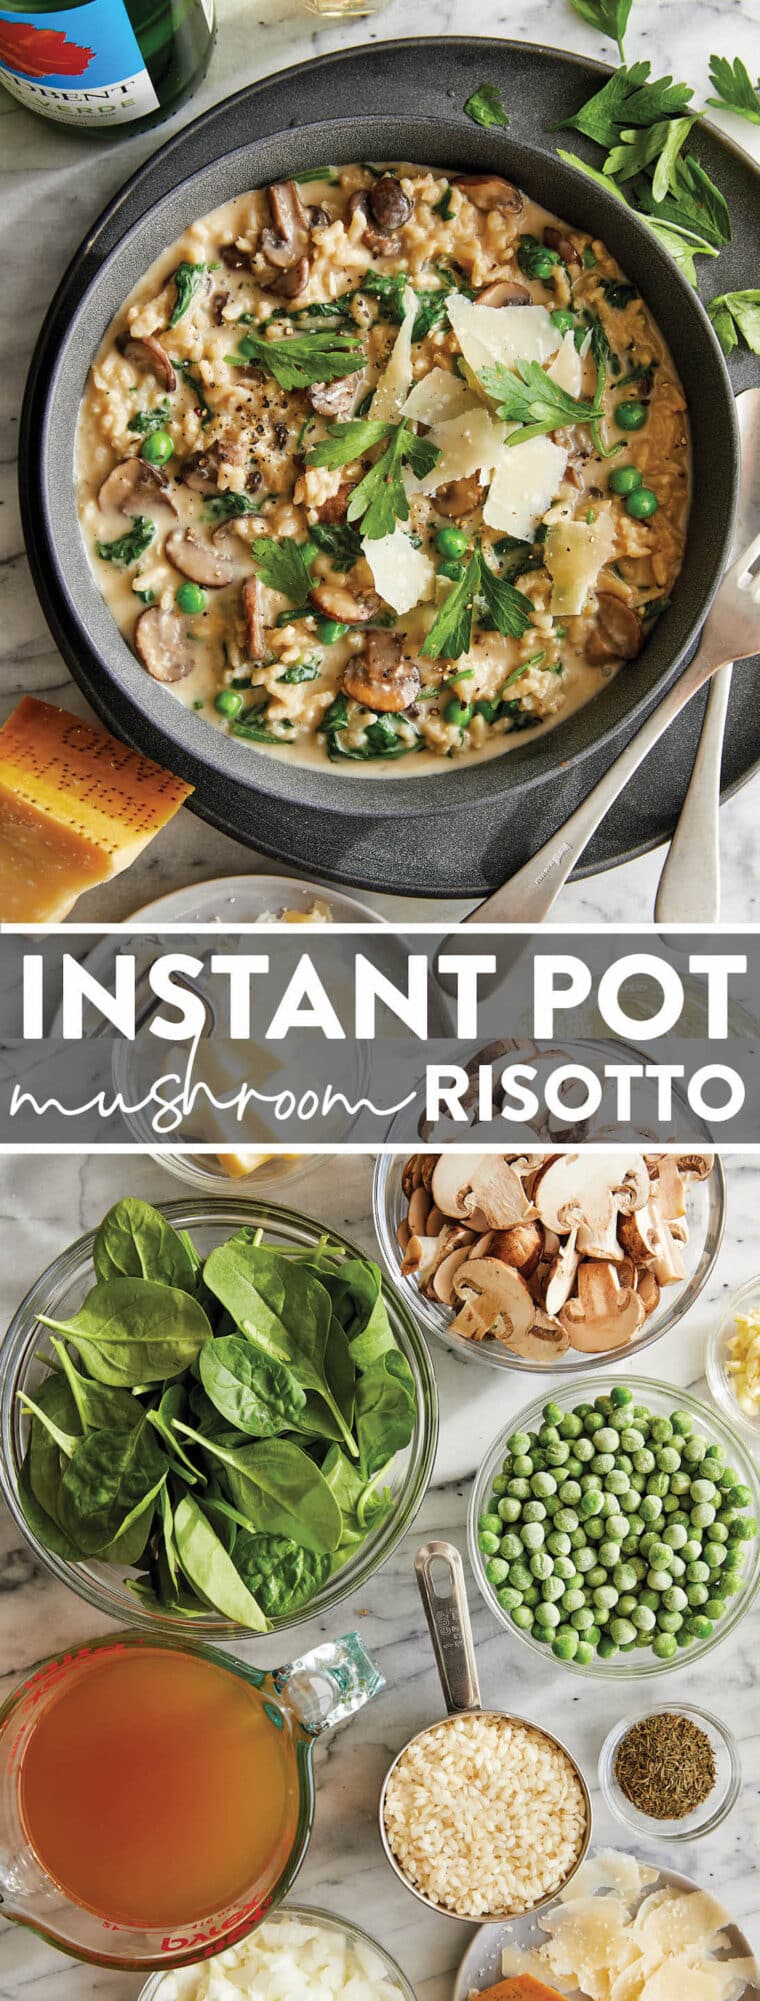 How To Use The Instant Pot - Dos & Don'ts - One Happy Housewife